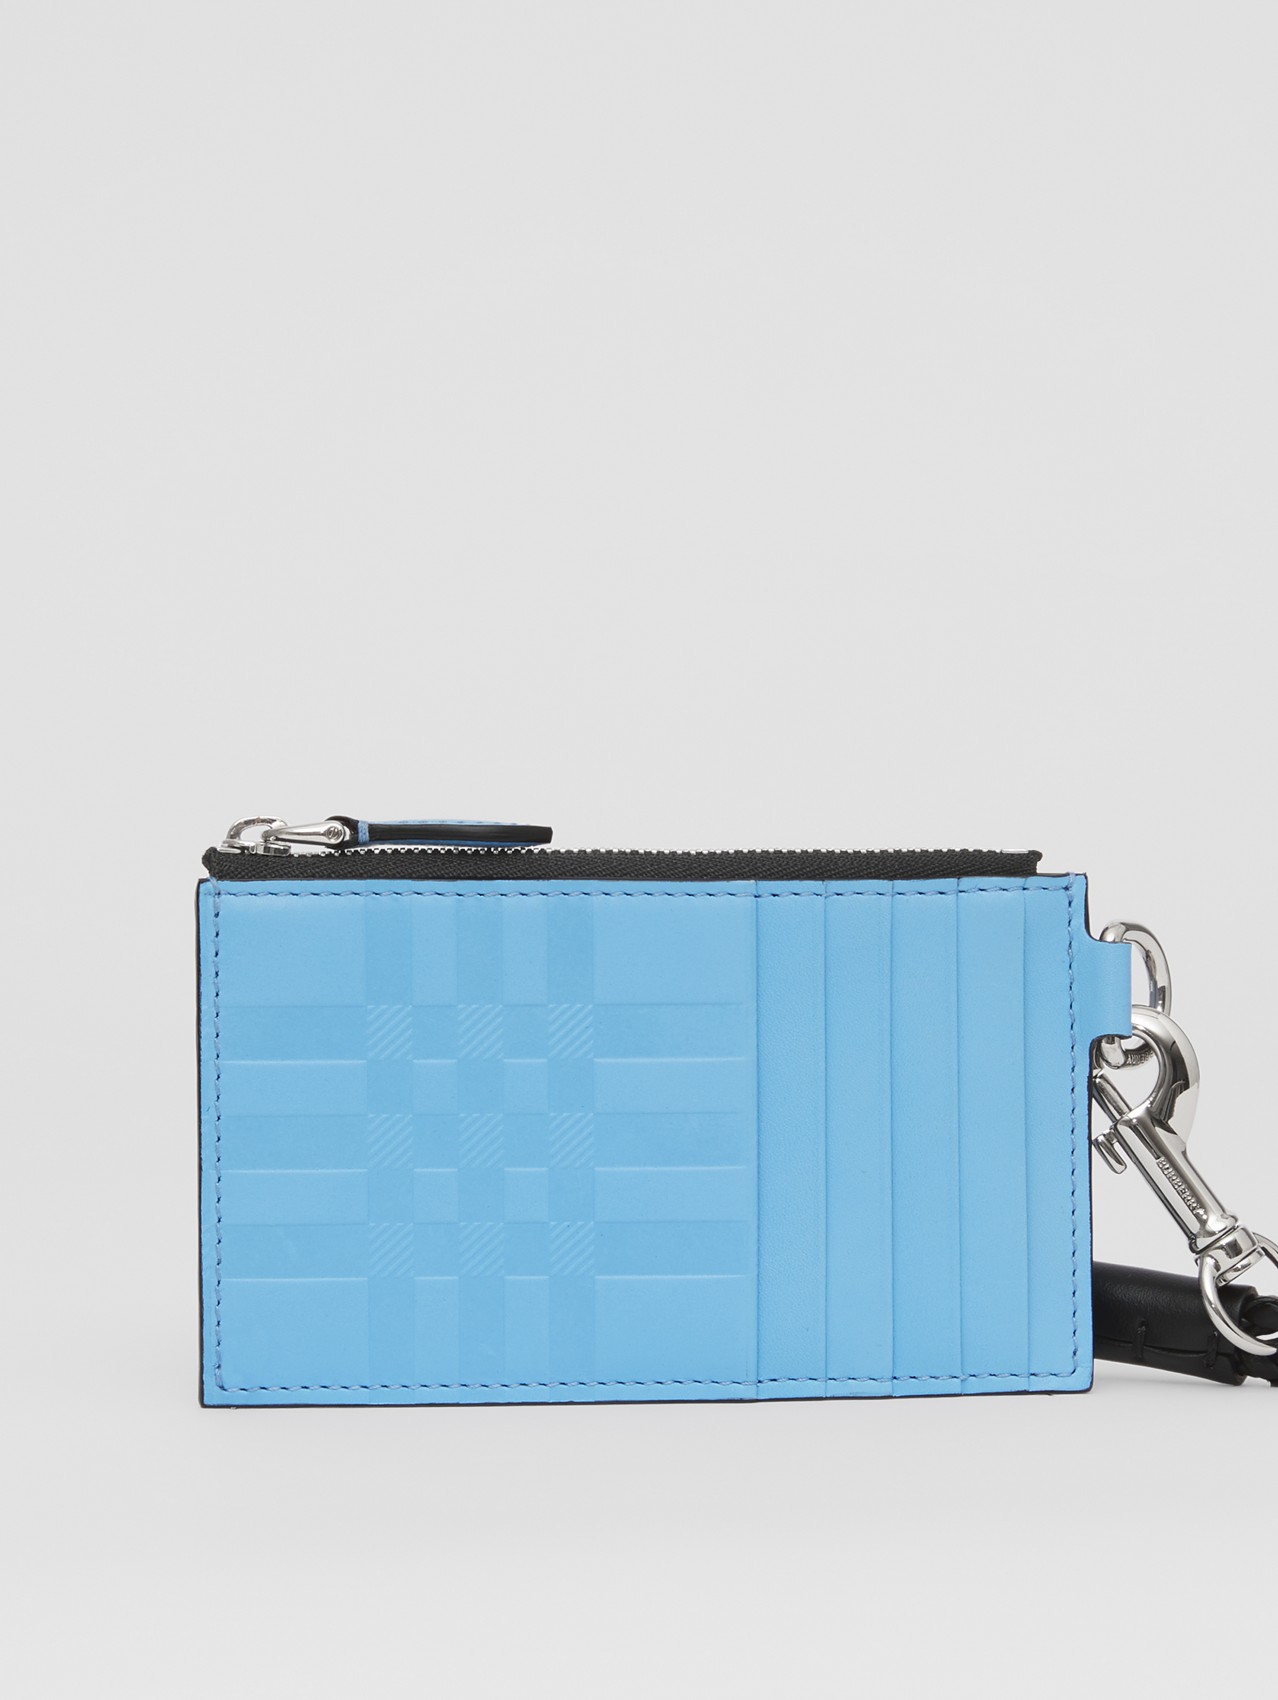 Embossed Check Leather Card Case Lanyard in Soft Cornflower Blue